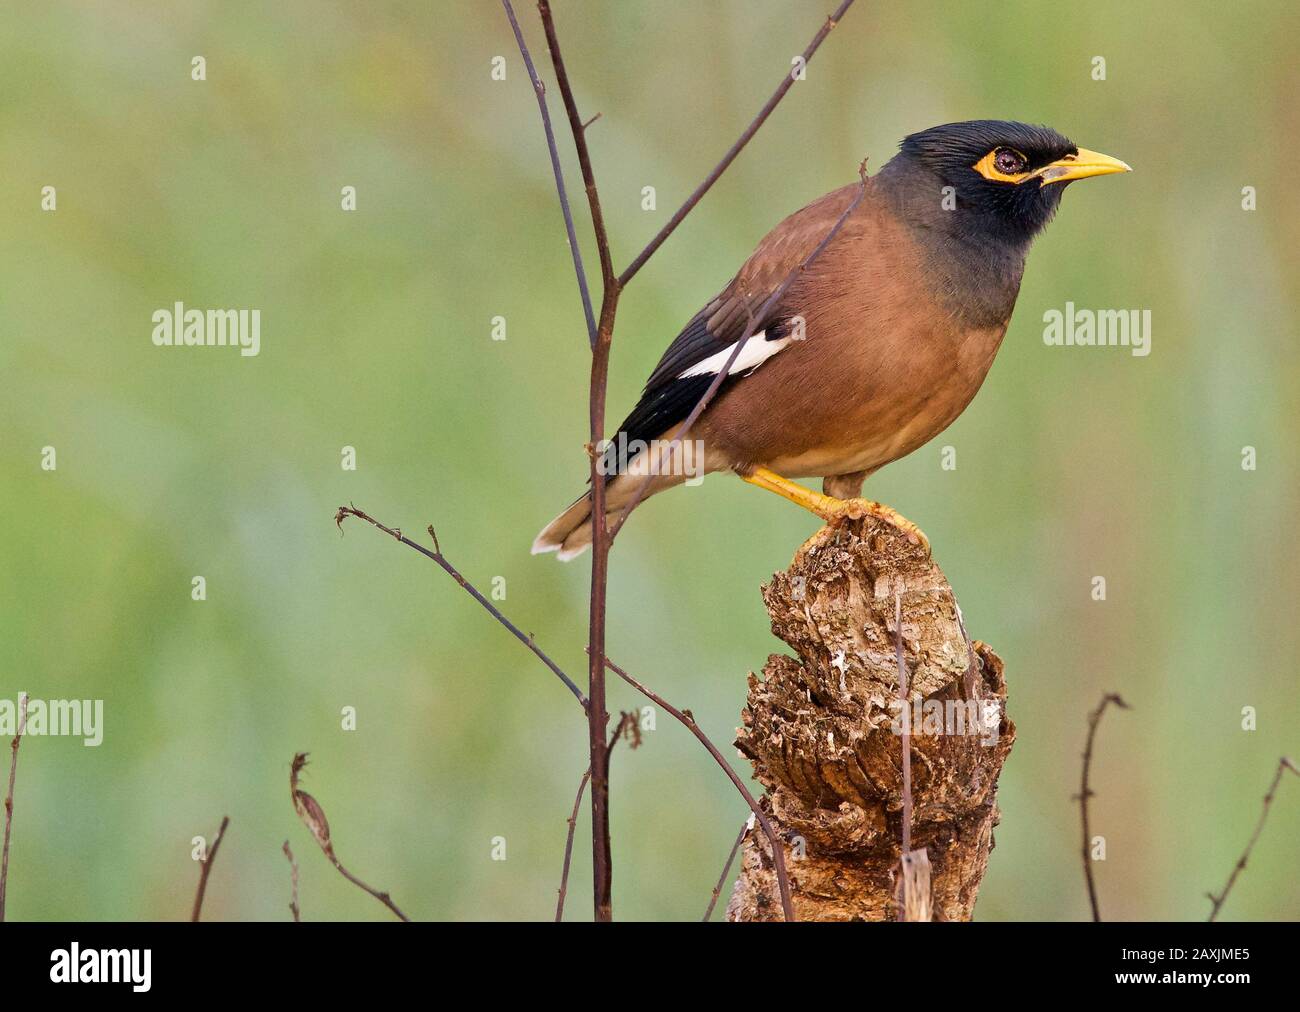 Myna commun / Myna indien(Acridotheres tristis) Banque D'Images